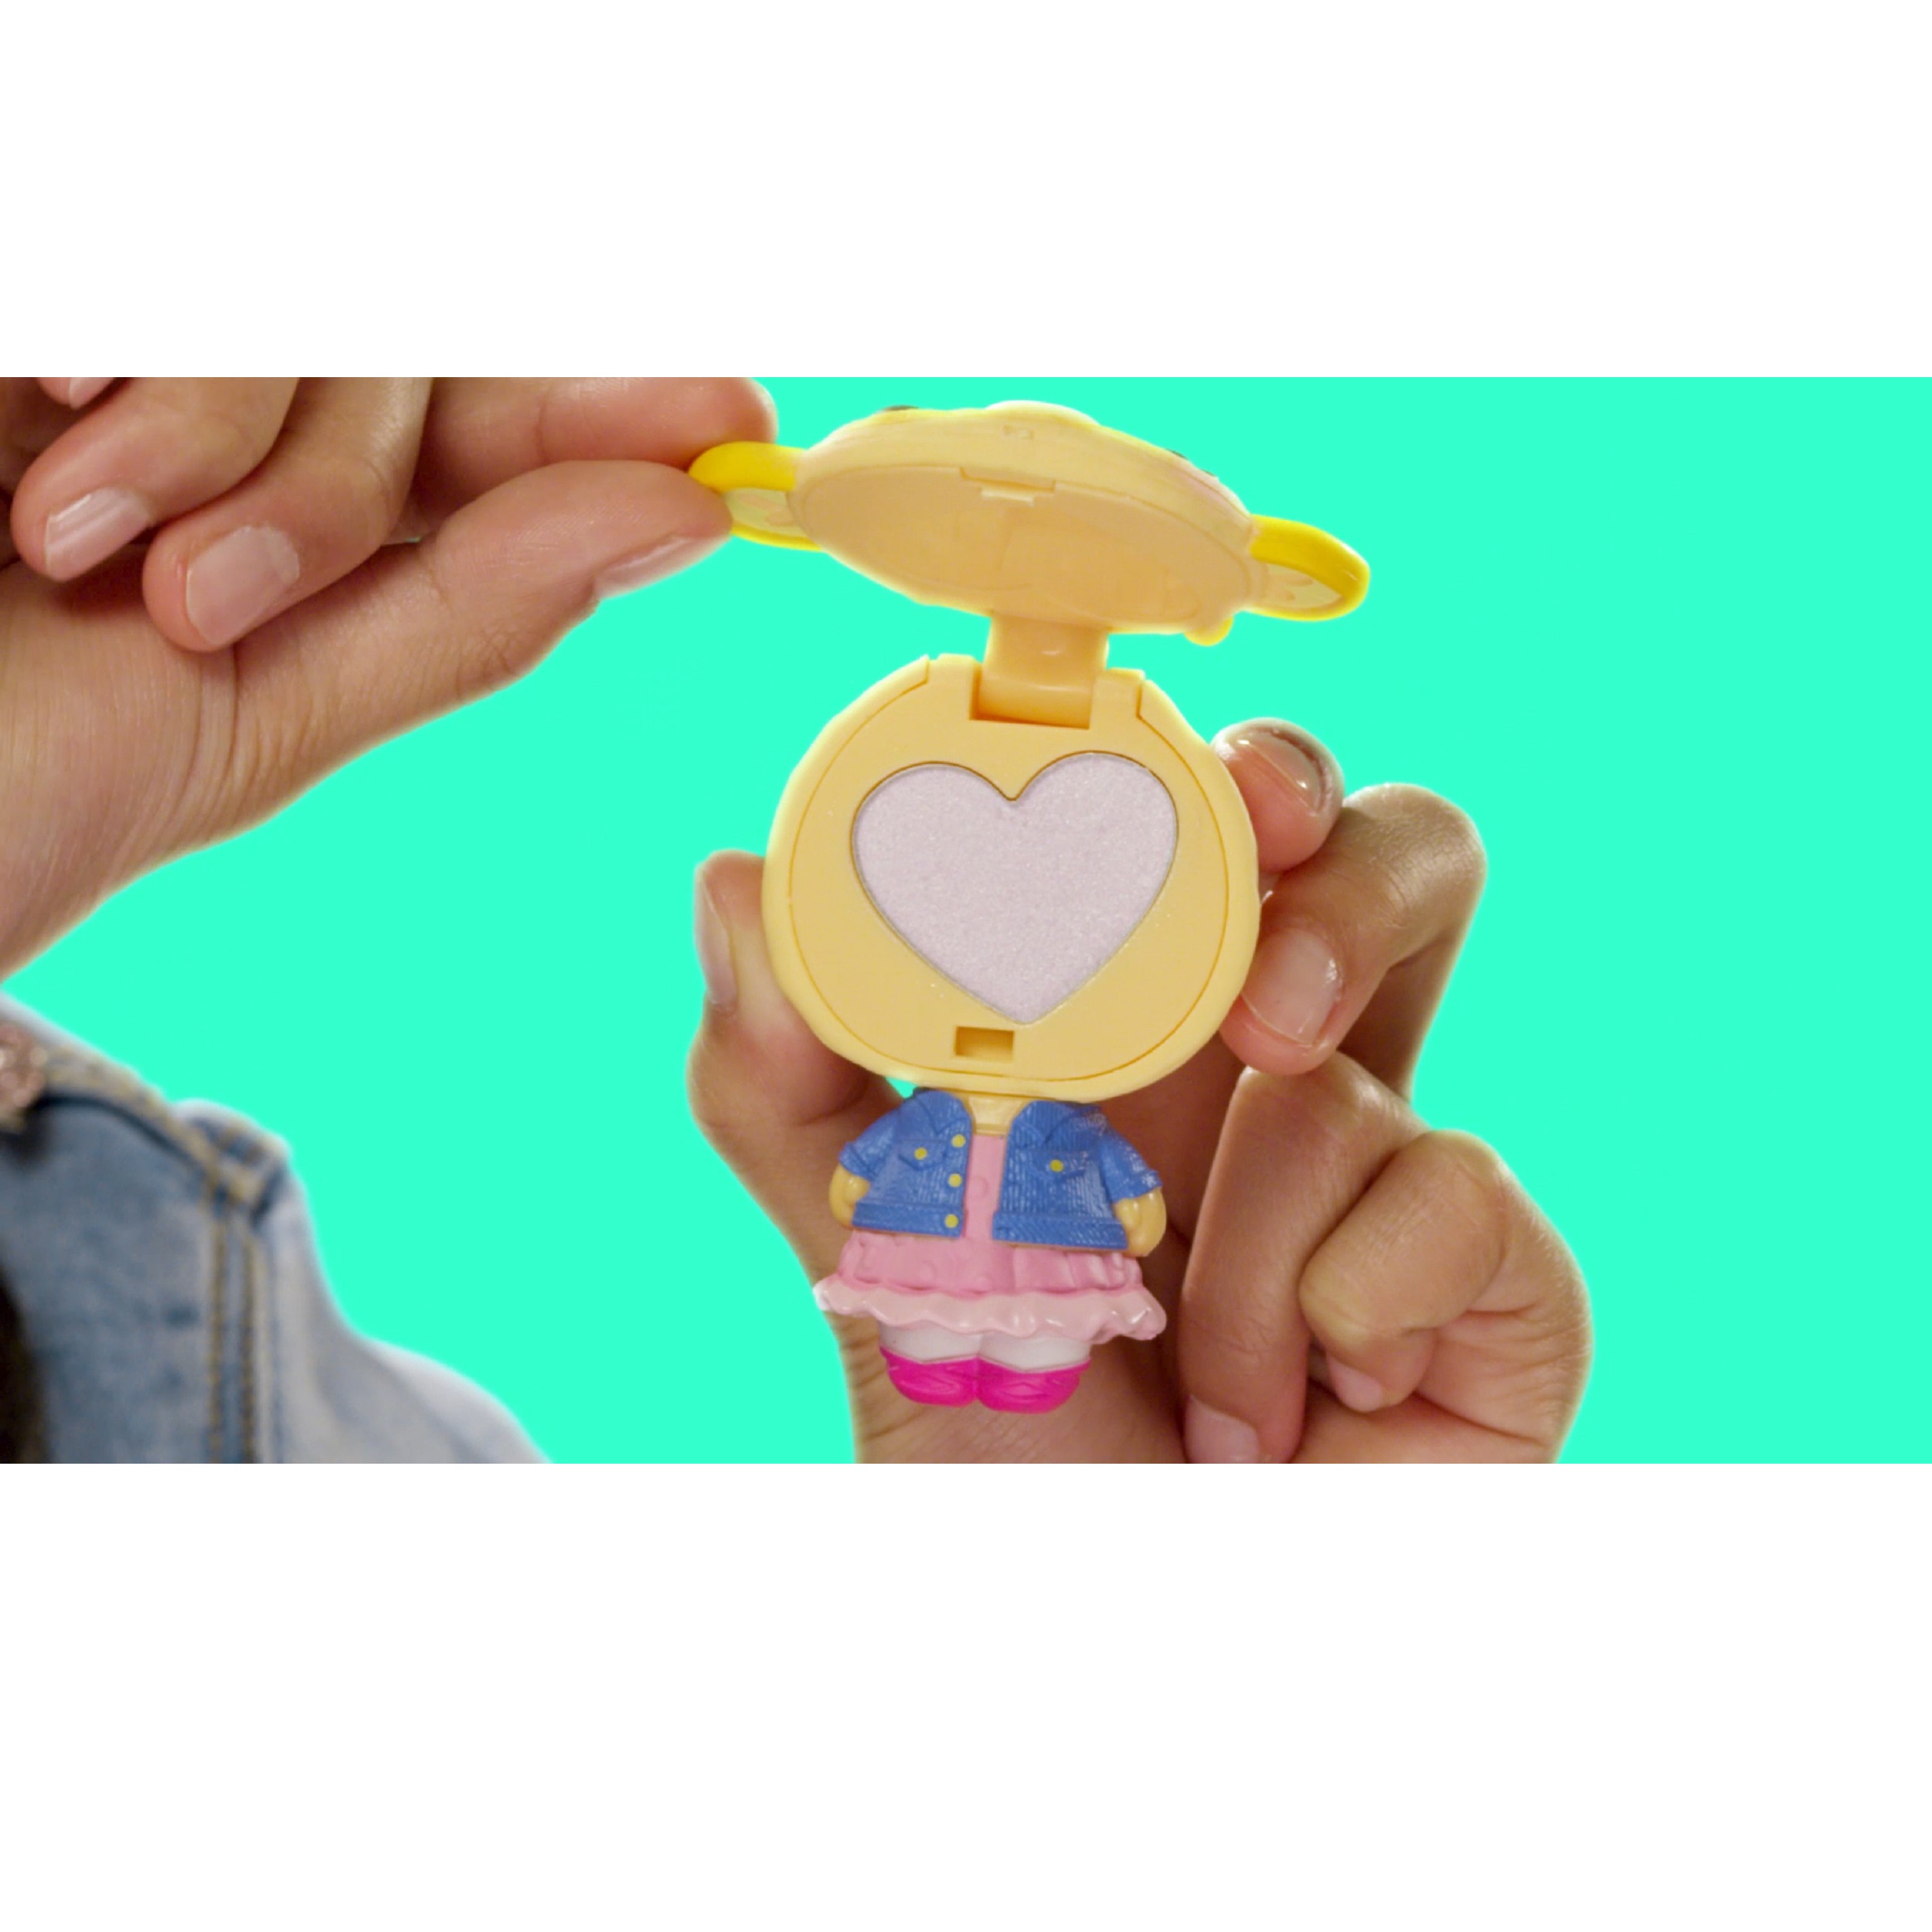 Num Noms Mystery Makeup with Hidden Cosmetics Inside Wave 2 - image 5 of 6